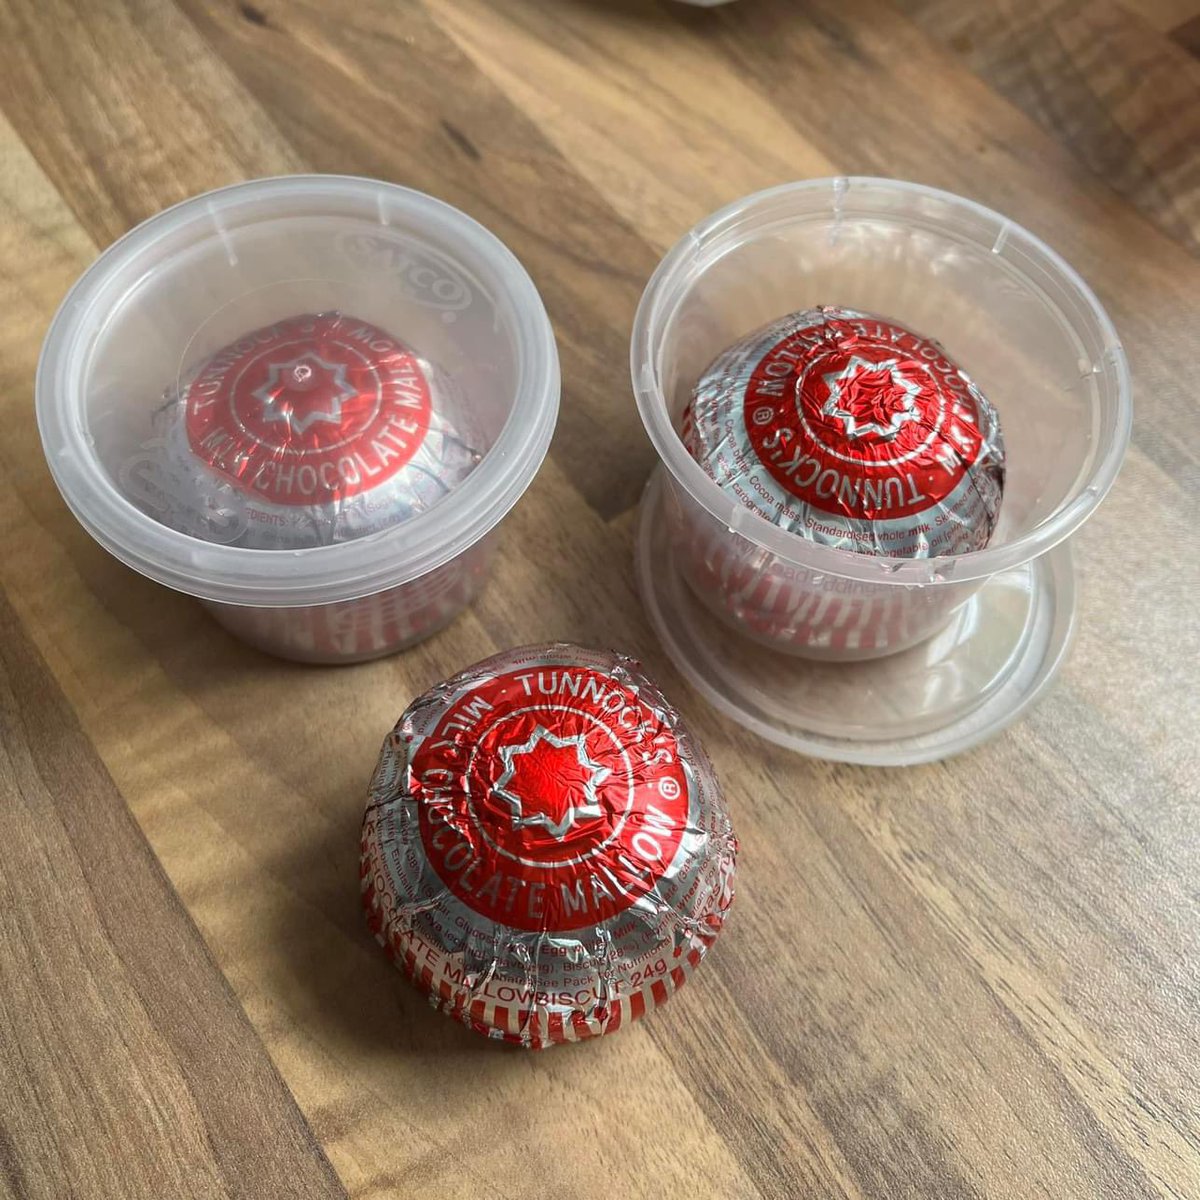 This might be deemed too exciting for the group, but I have discovered that small Chinese takeaway sauce containers make perfect individual Tunnocks Teacake holders/transporters. Perfect for preventing chocolate-breakage and marshmallow-squashage 👌🏻. Age 51, size 6.5 feet (7 if…